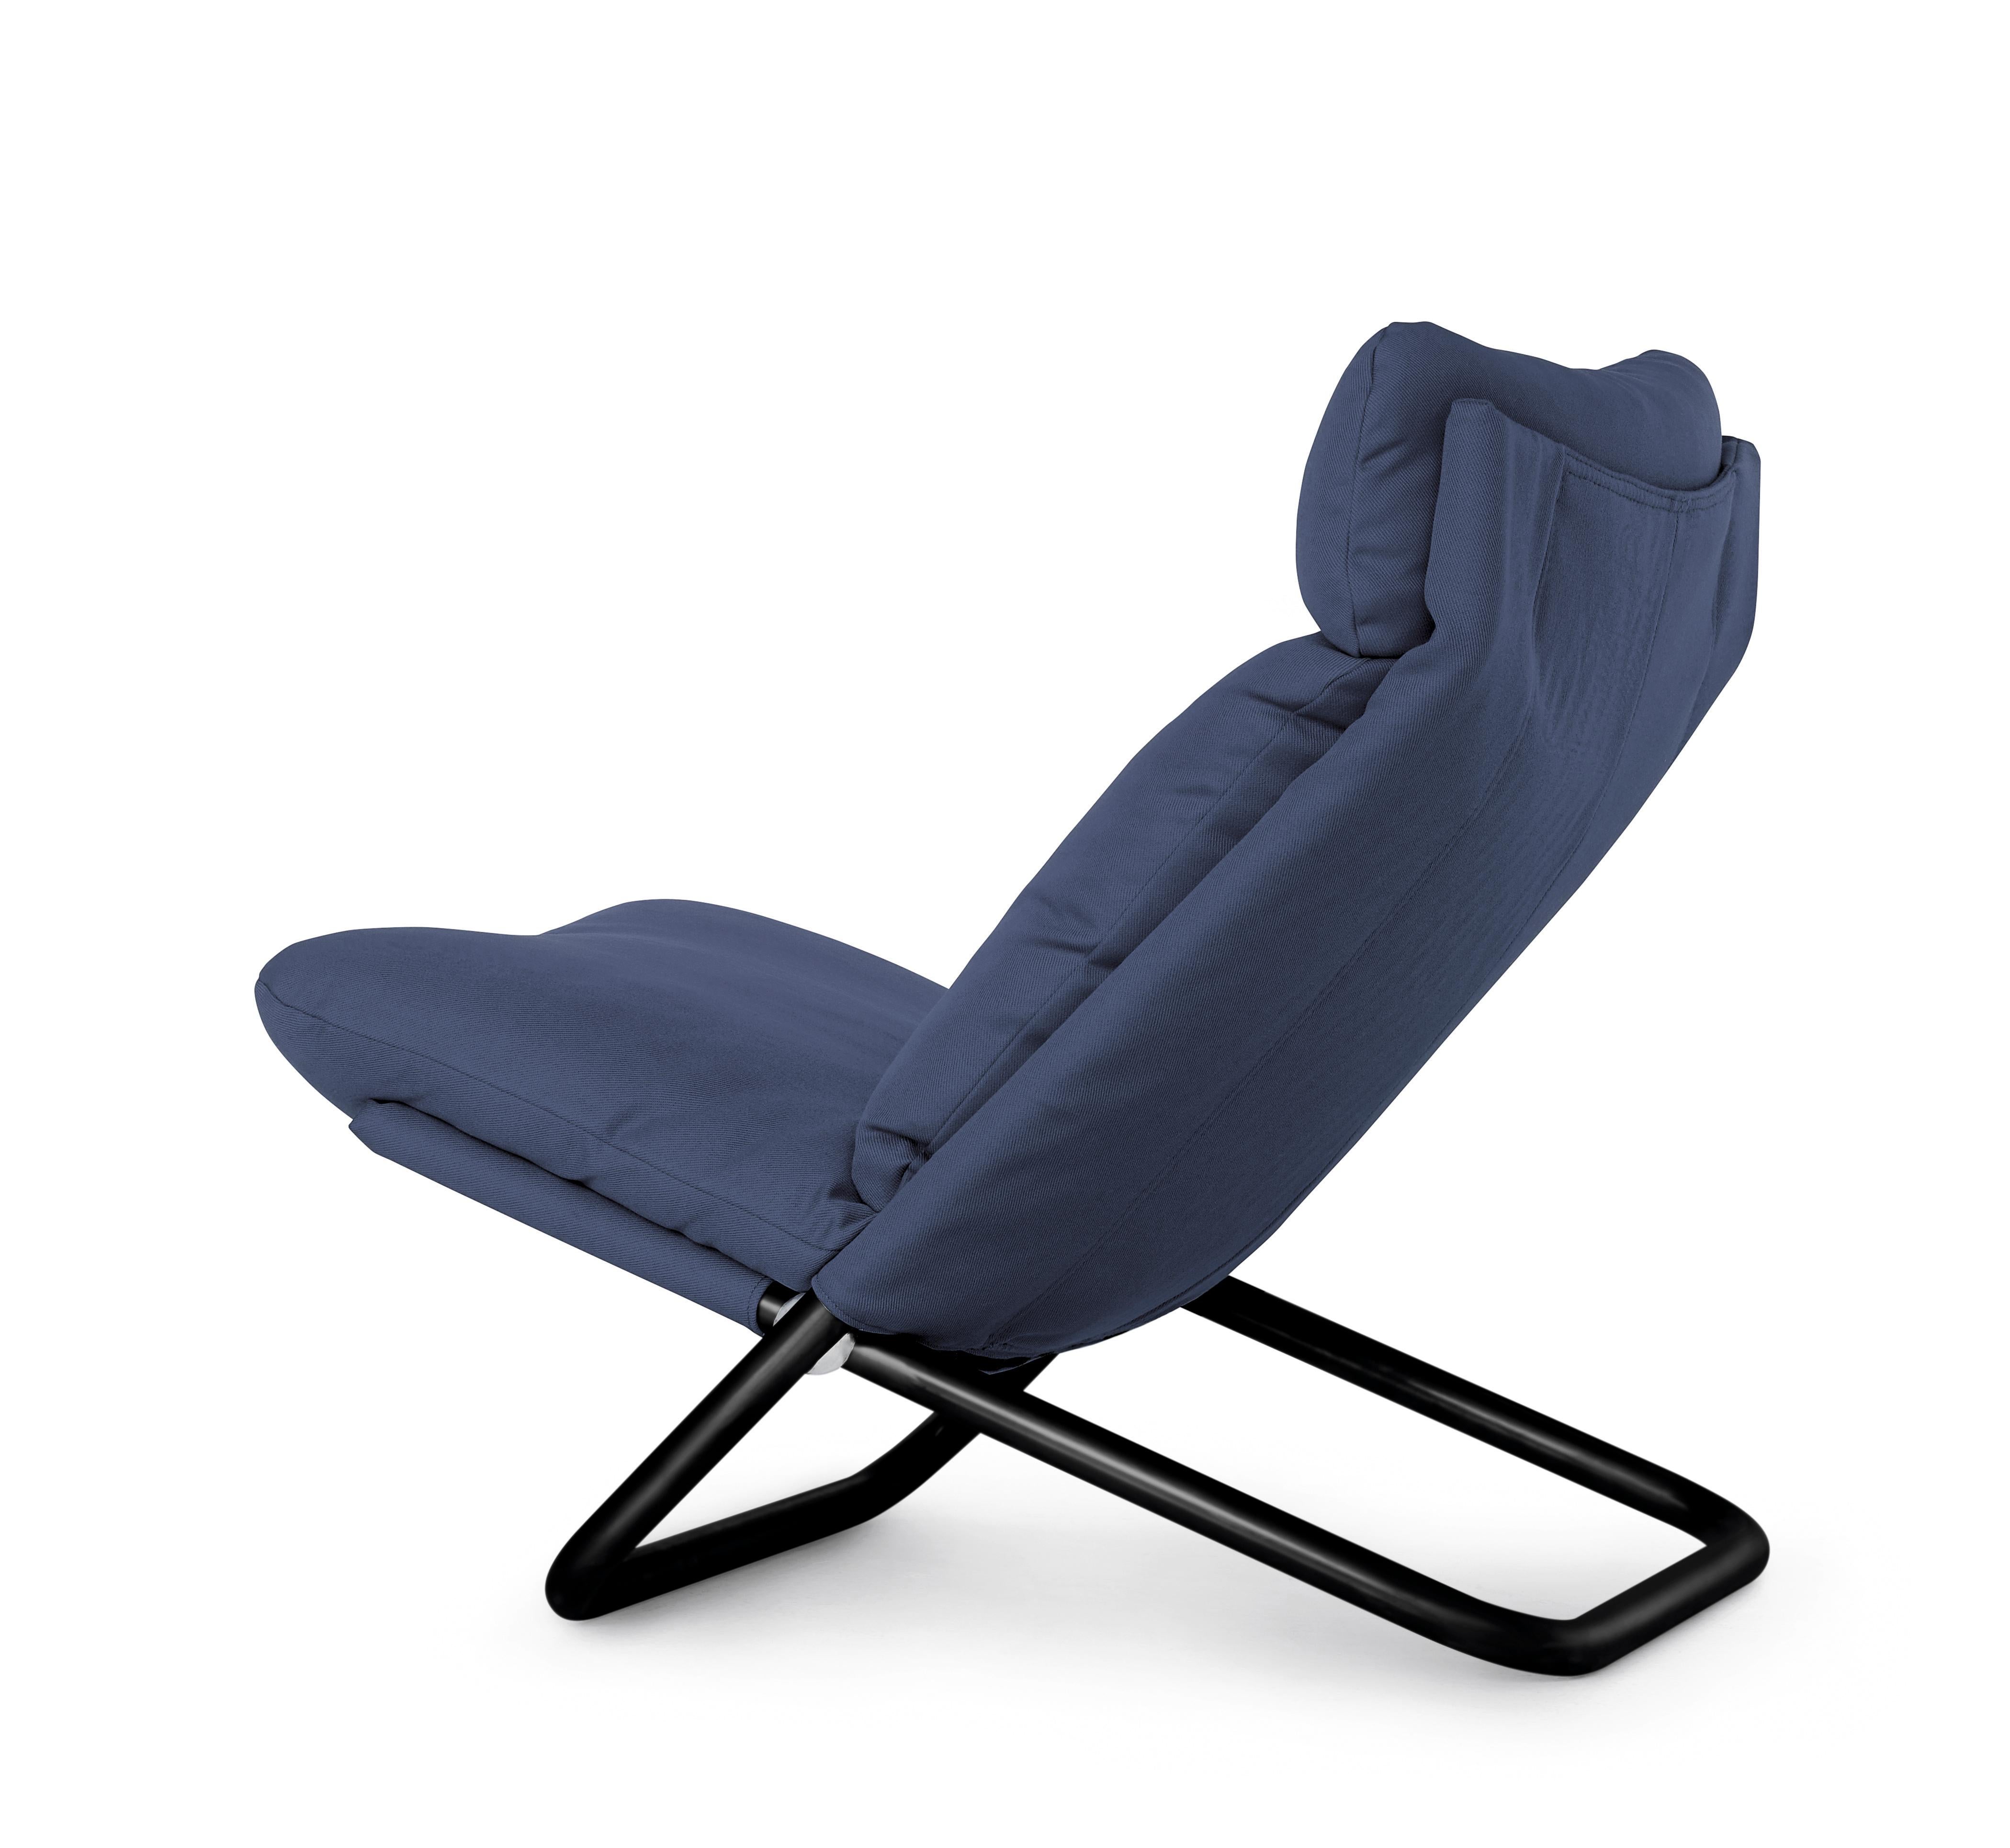 The seat was born from a very simple idea: two tubes bent into a “U” shape and connected together by a joint.

Additional information:
Materials: Upholstered seat with Black Metal Frame
Color: Steelcut 2 Col. 775,T4
Structure: Metal, Lacquered